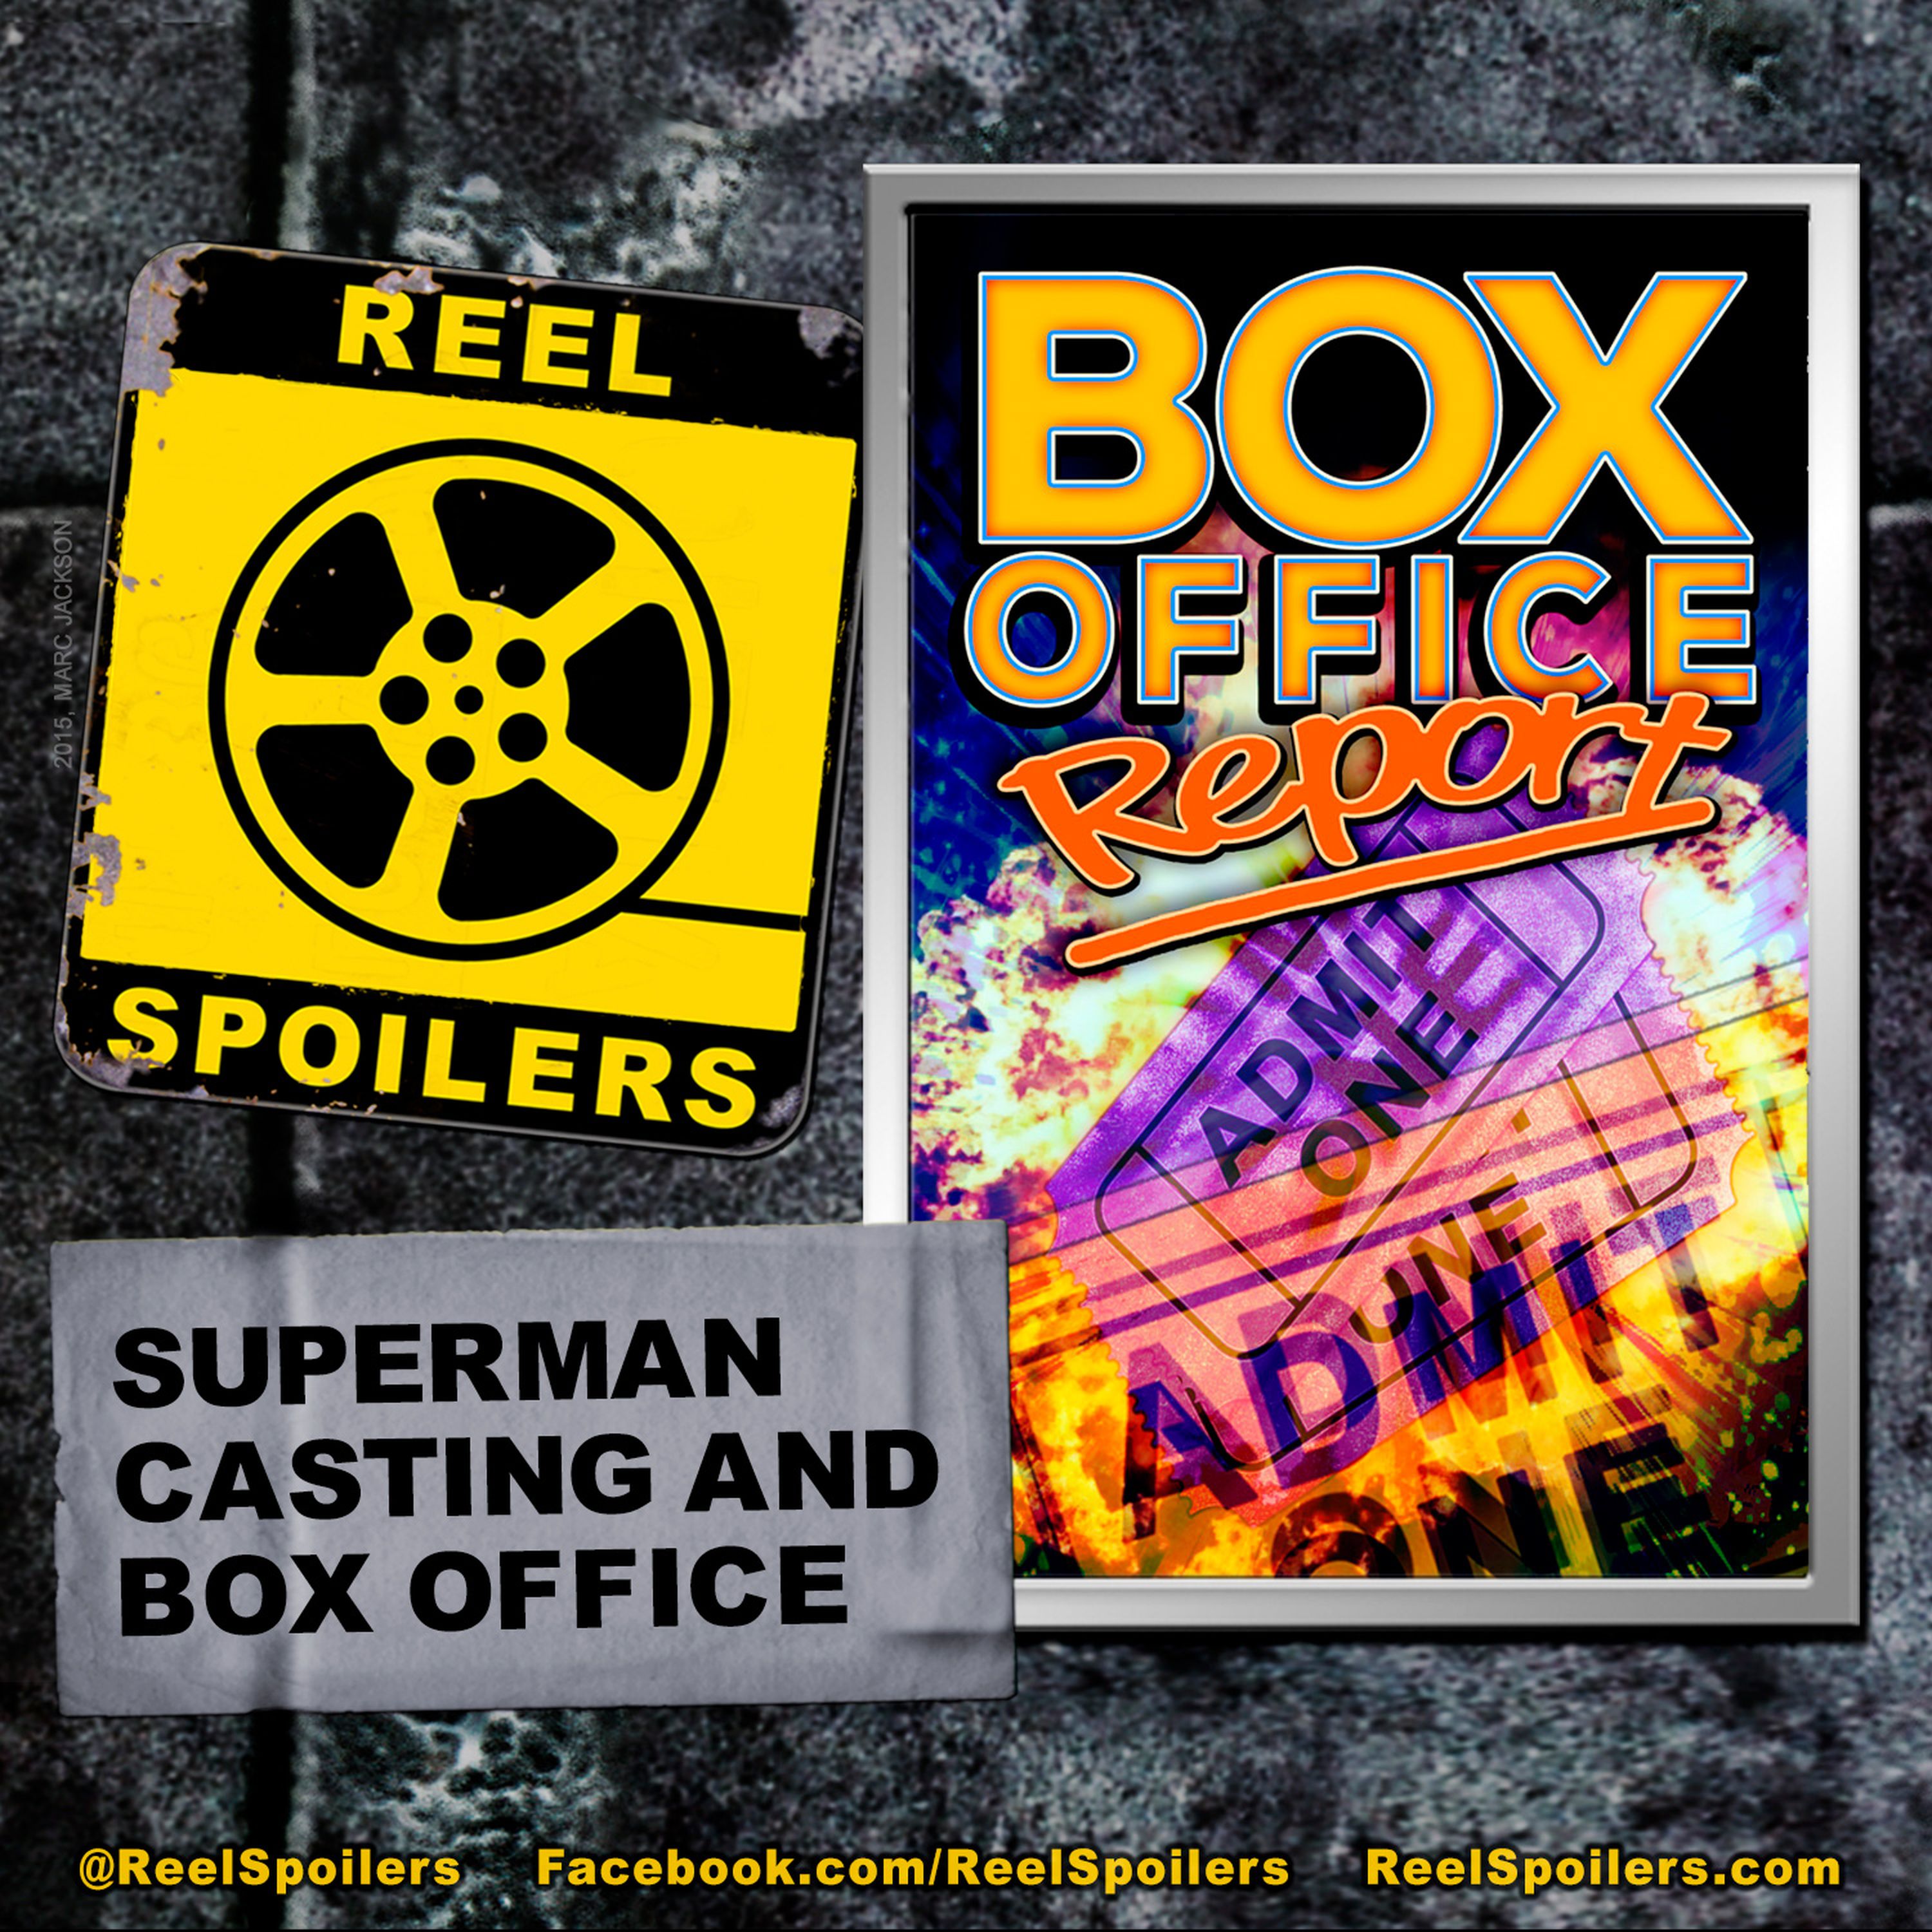 Superman Casting News and Box Office Image